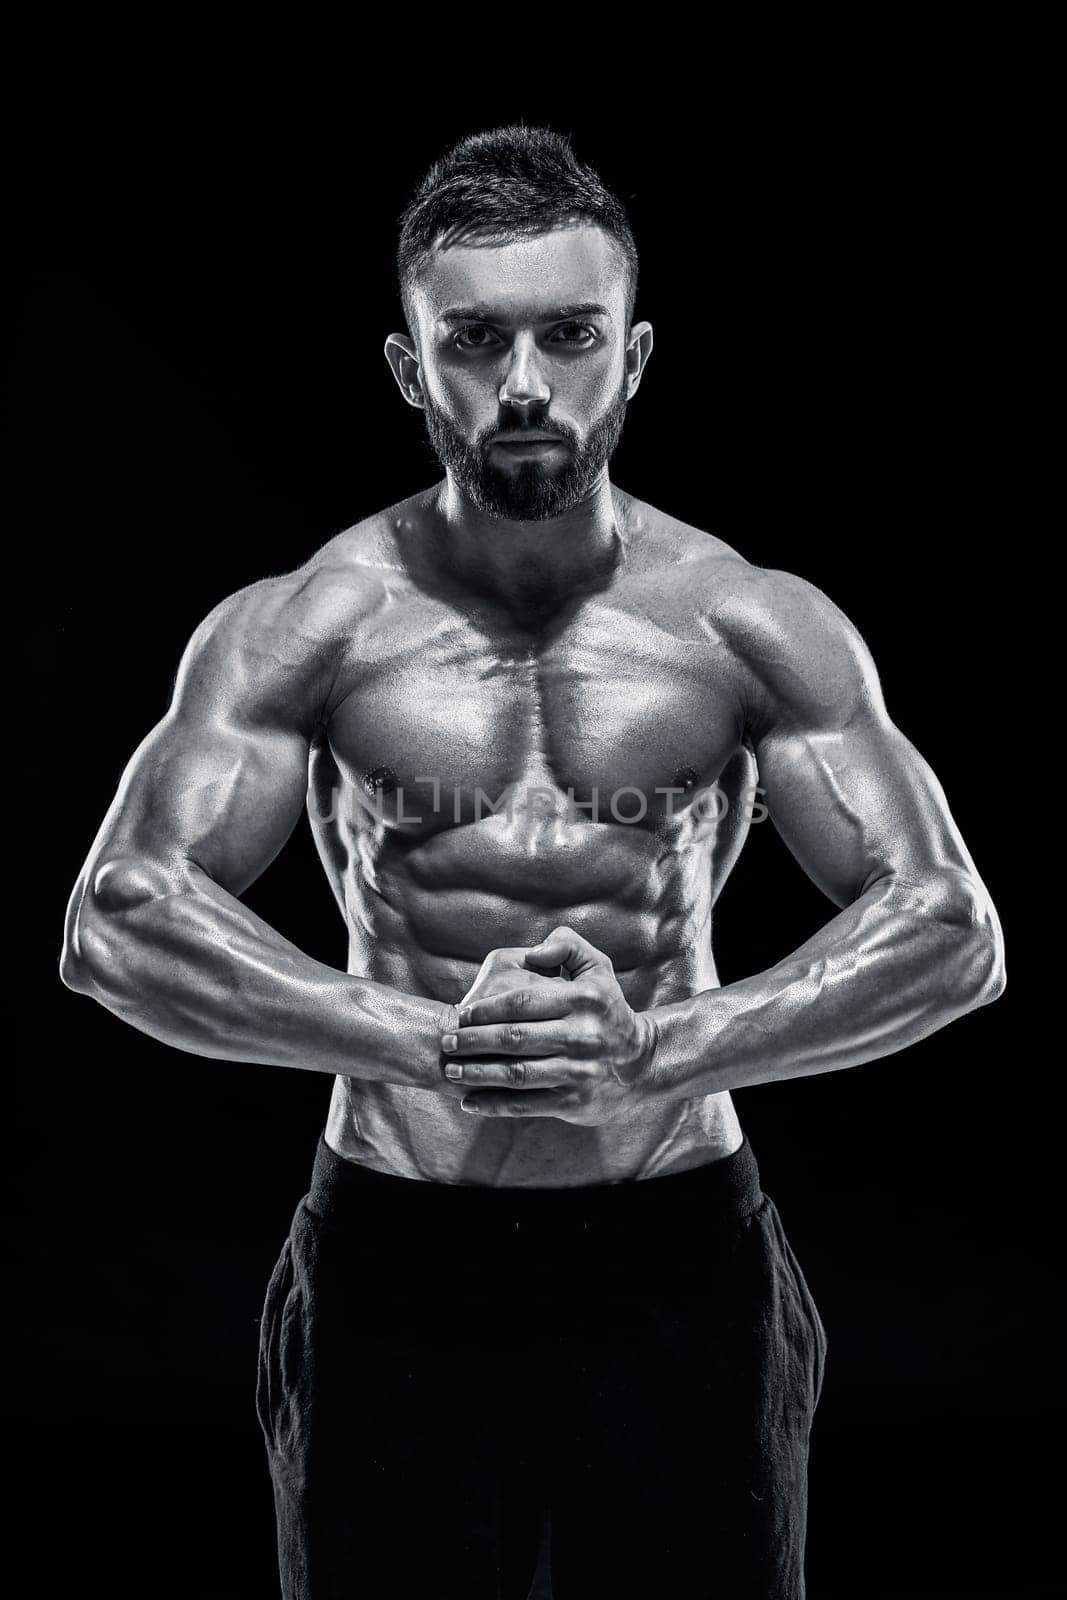 Image of very muscular man posing with naked torso in studio on black background. Black and white color